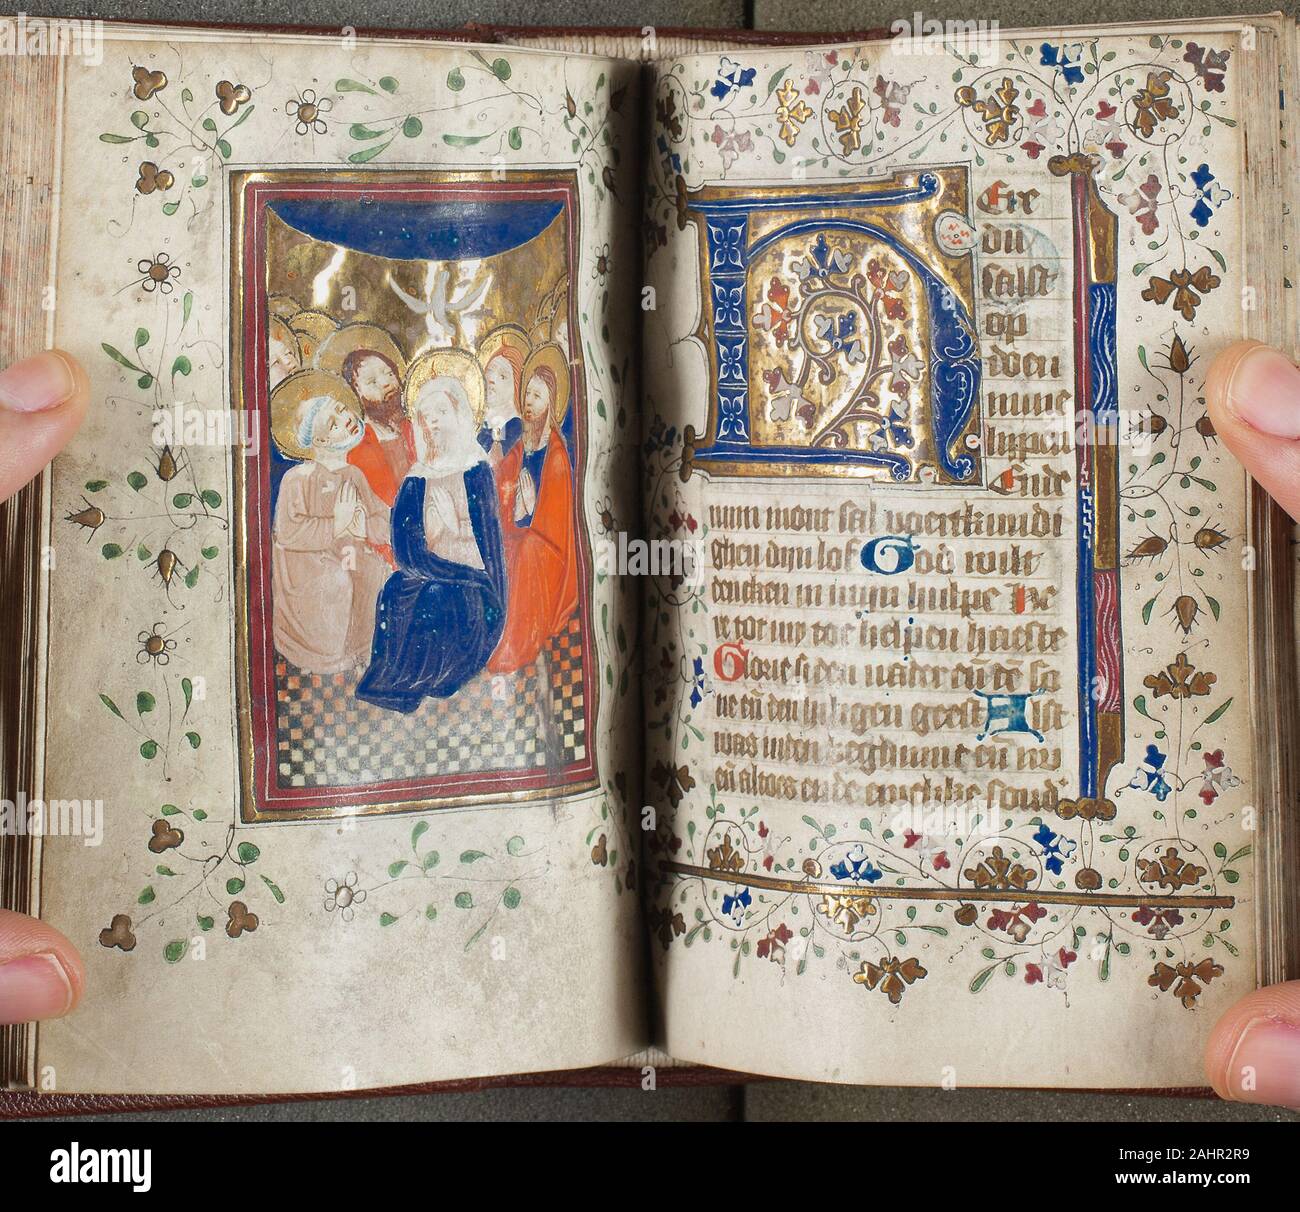 Master of Zweder van Culemborg. Book of Hours. 1410–1430. Netherlands. Manuscript with 259 folios, six miniatures and other decorations in tempera and gold leaf, with Dutch inscriptions in littera textualis, in blackish brown ink, ruled in graphite, on parchment, in a modern binding of brown morocco over wooden boards, with stamped designs on the endbands, and with machine cut edges, marbled in red and blue Stock Photo